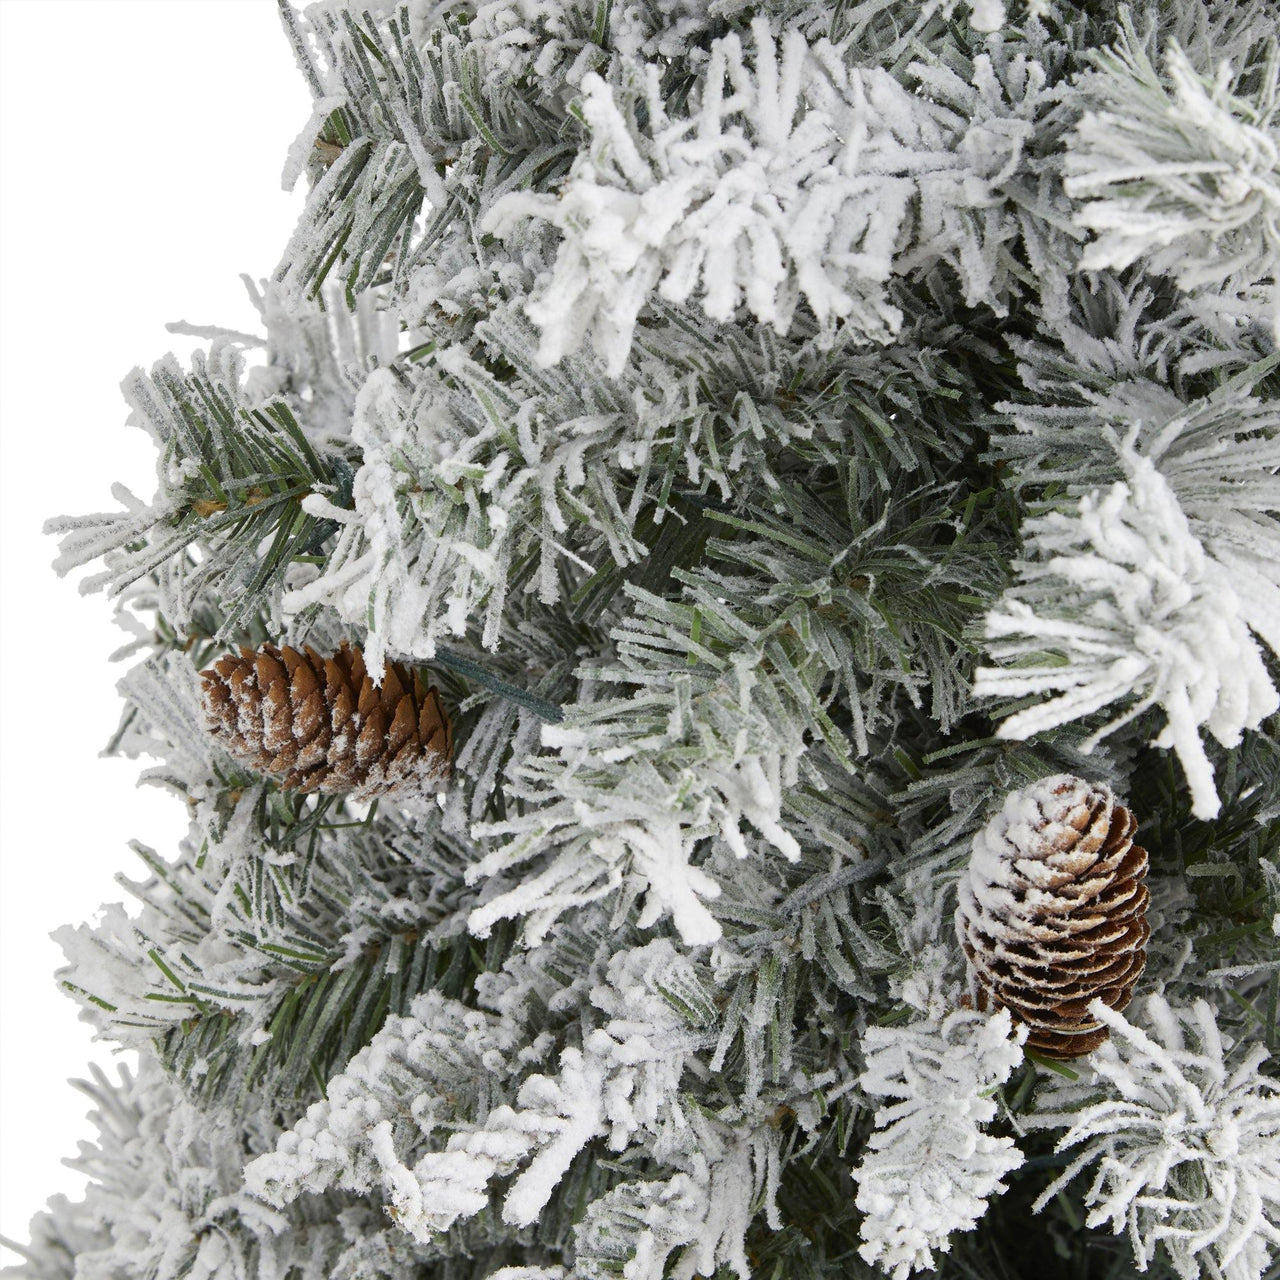 3' Flocked White River Mountain Pine Artificial Christmas Tree with Pinecones - The Fox Decor